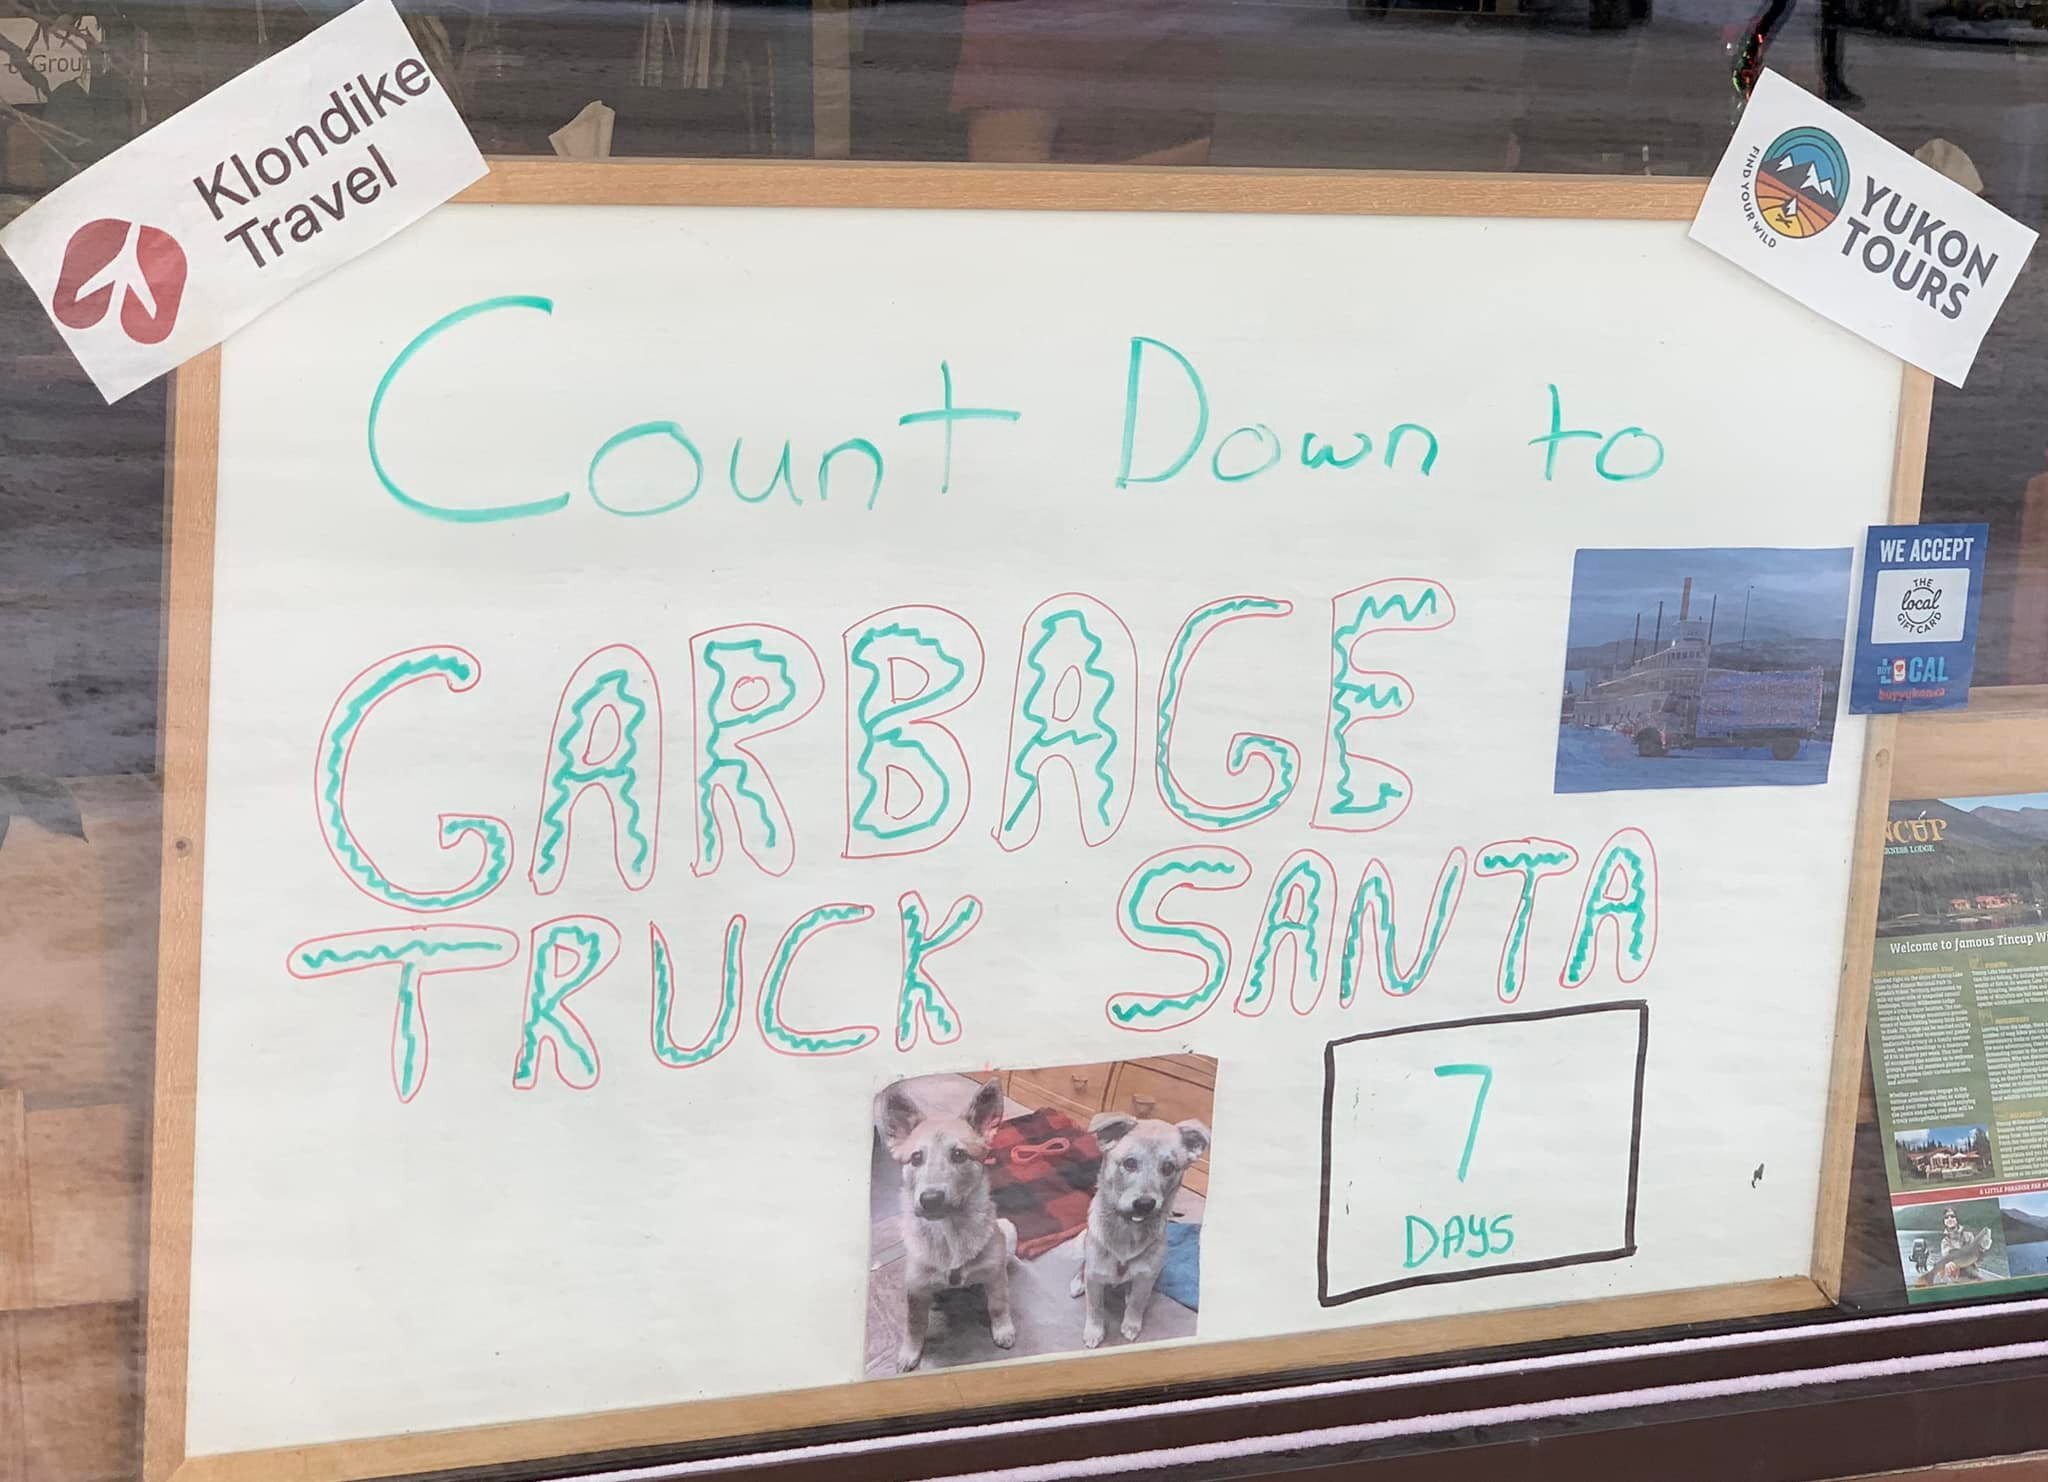 Have you been lucky enough to see Garbage Truck Santa in person? We can&rsquo;t wait for his return and promise we&rsquo;ve been good! 🎅🏻 
#theyukon #findyourwild #yukontours #klondiketravel #garbagetrucksanta #holidaytraditions